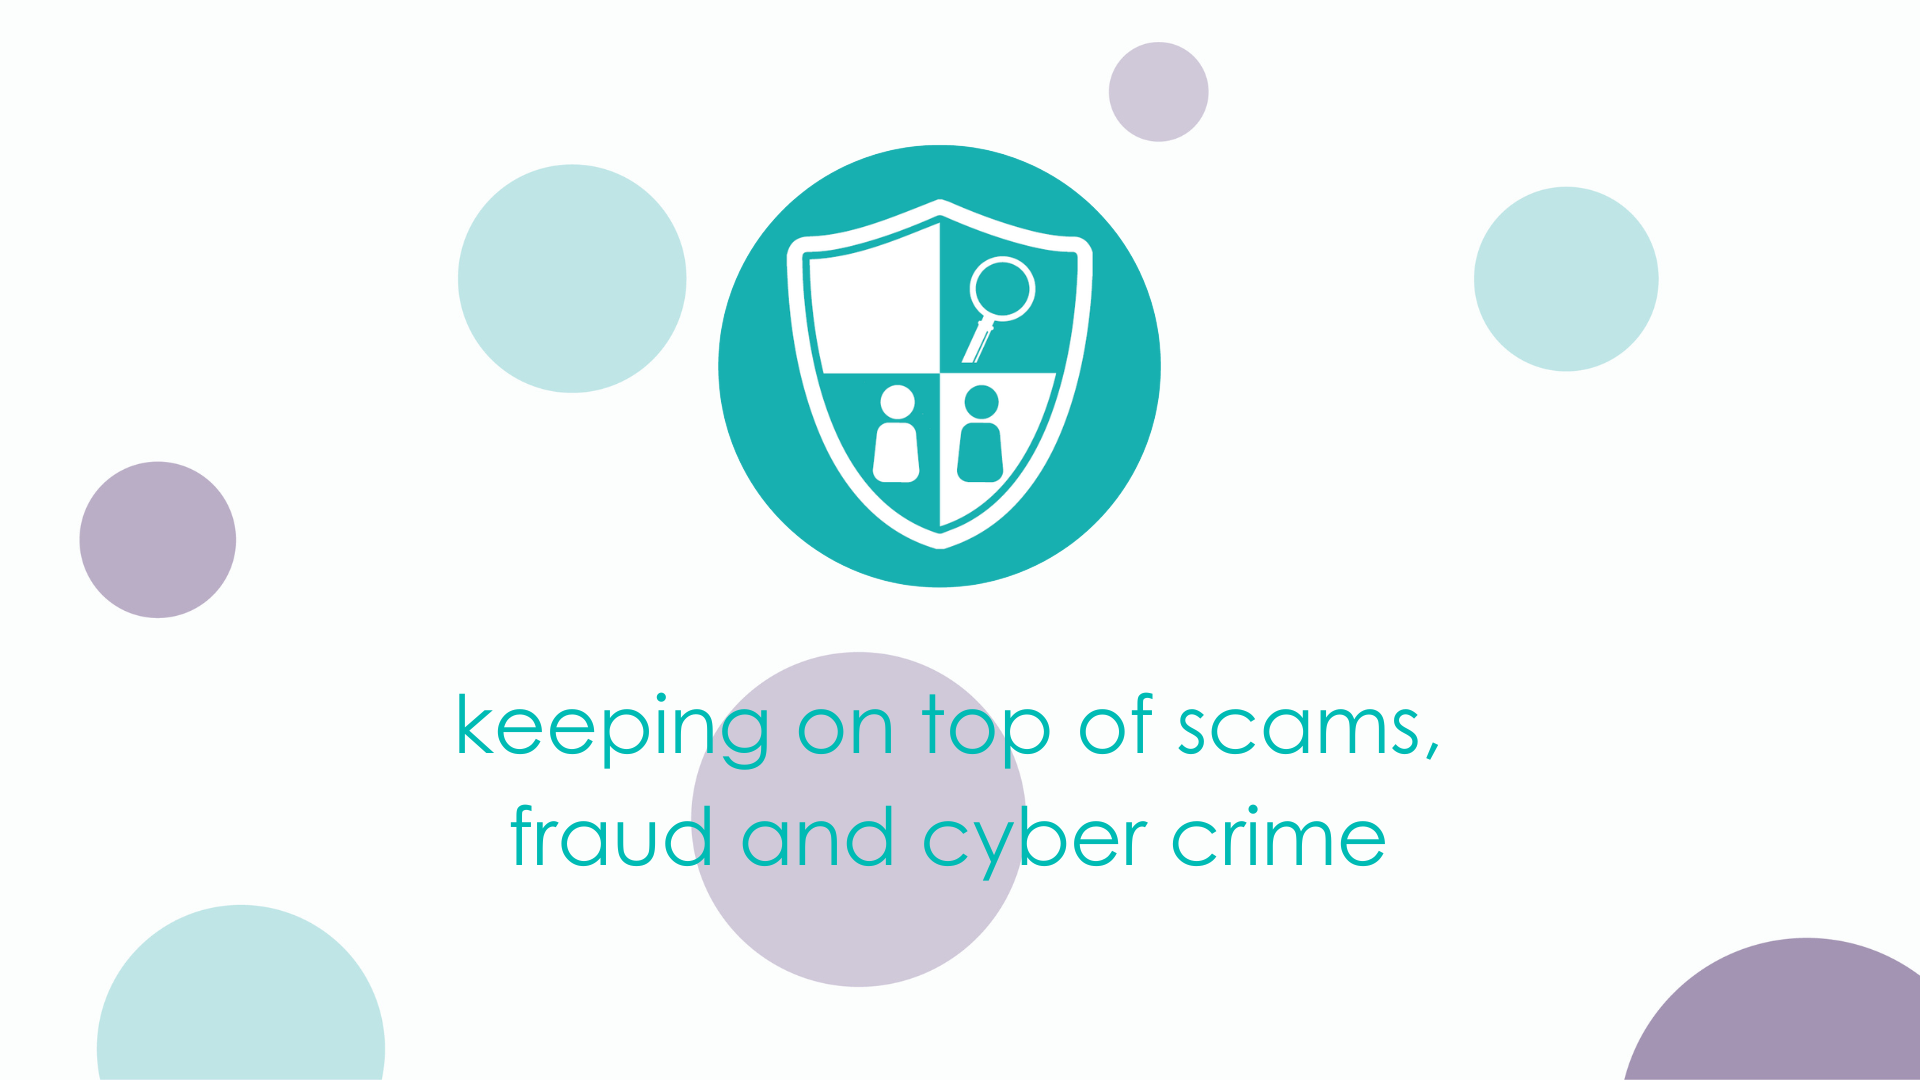 Keeping on top of scams, fraud and cyber crime 